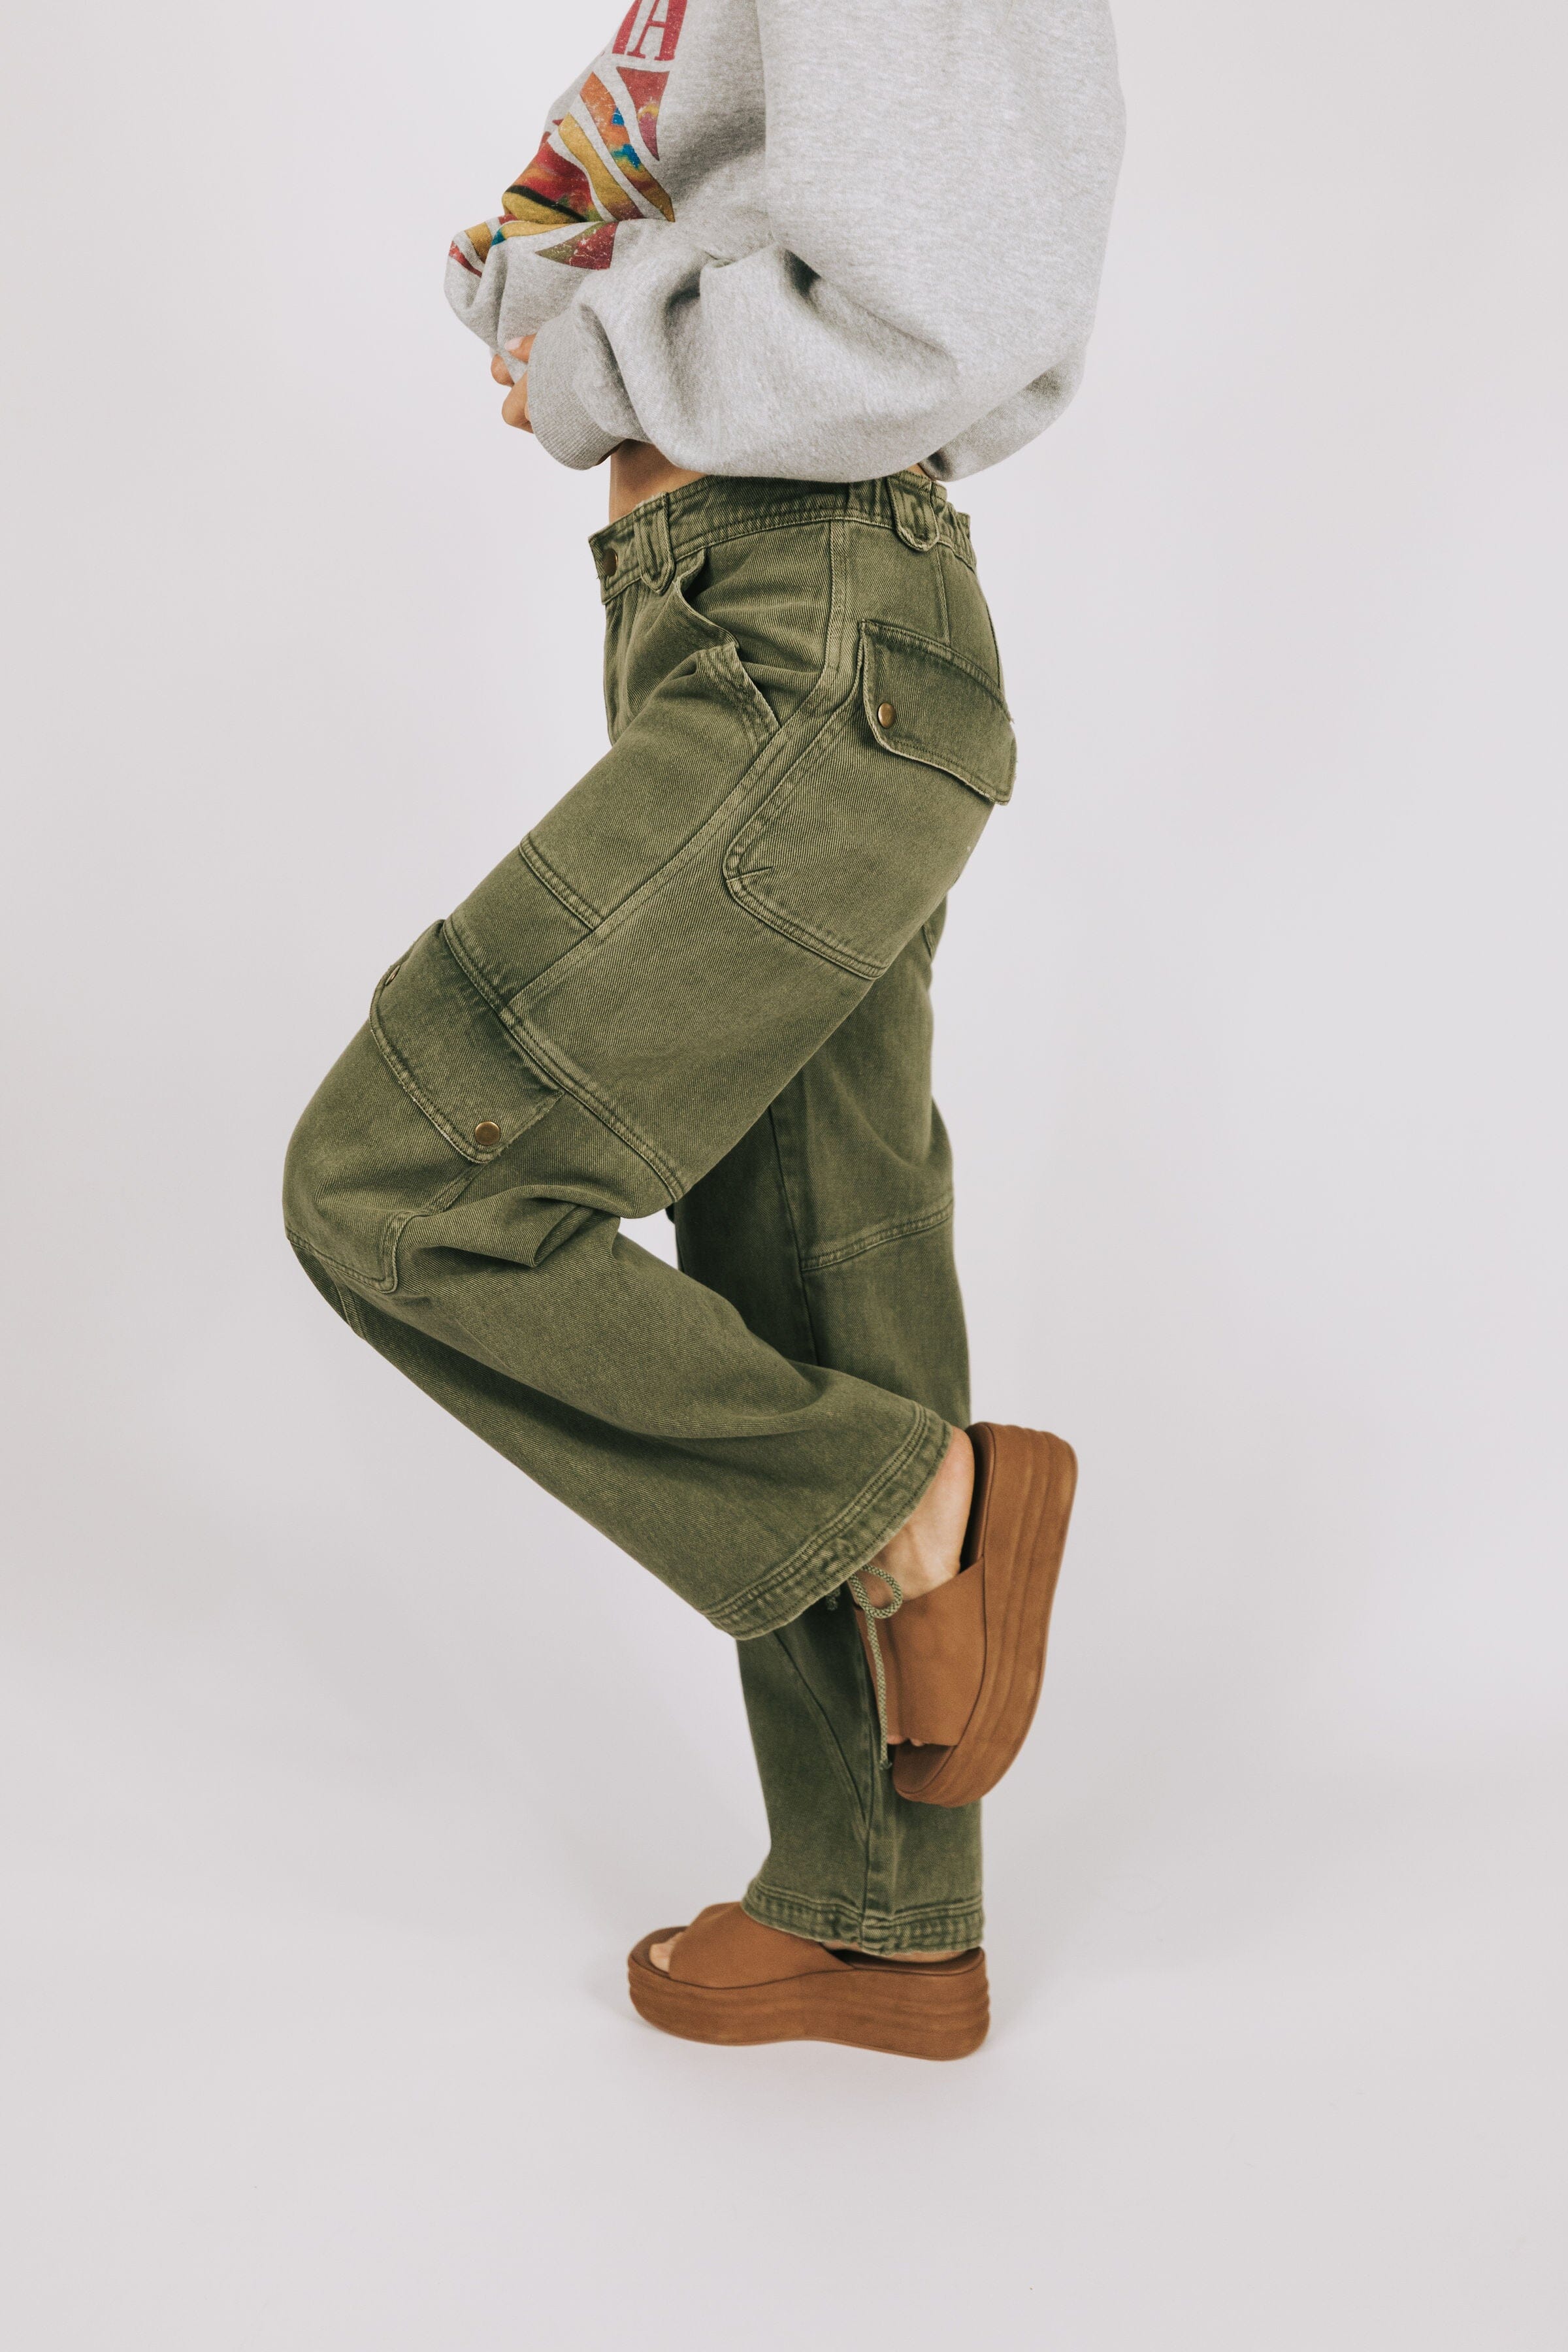 FREE PEOPLE - Come And Get It Utility Pants